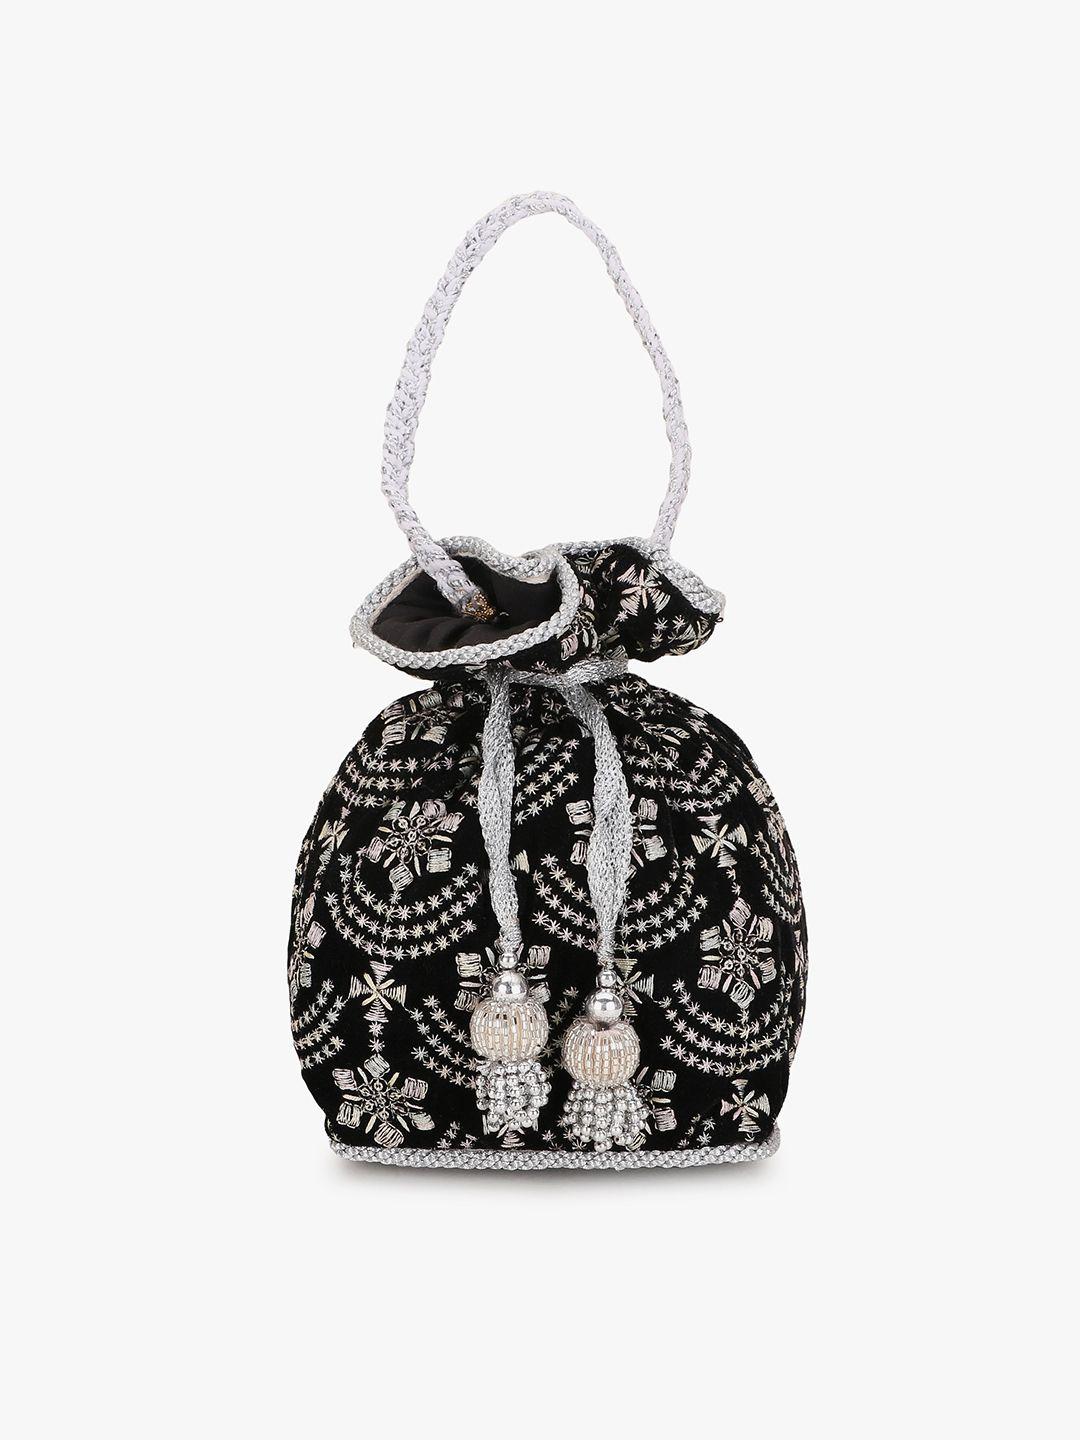 anekaant black & silver-toned embroidered tasselled potli clutch